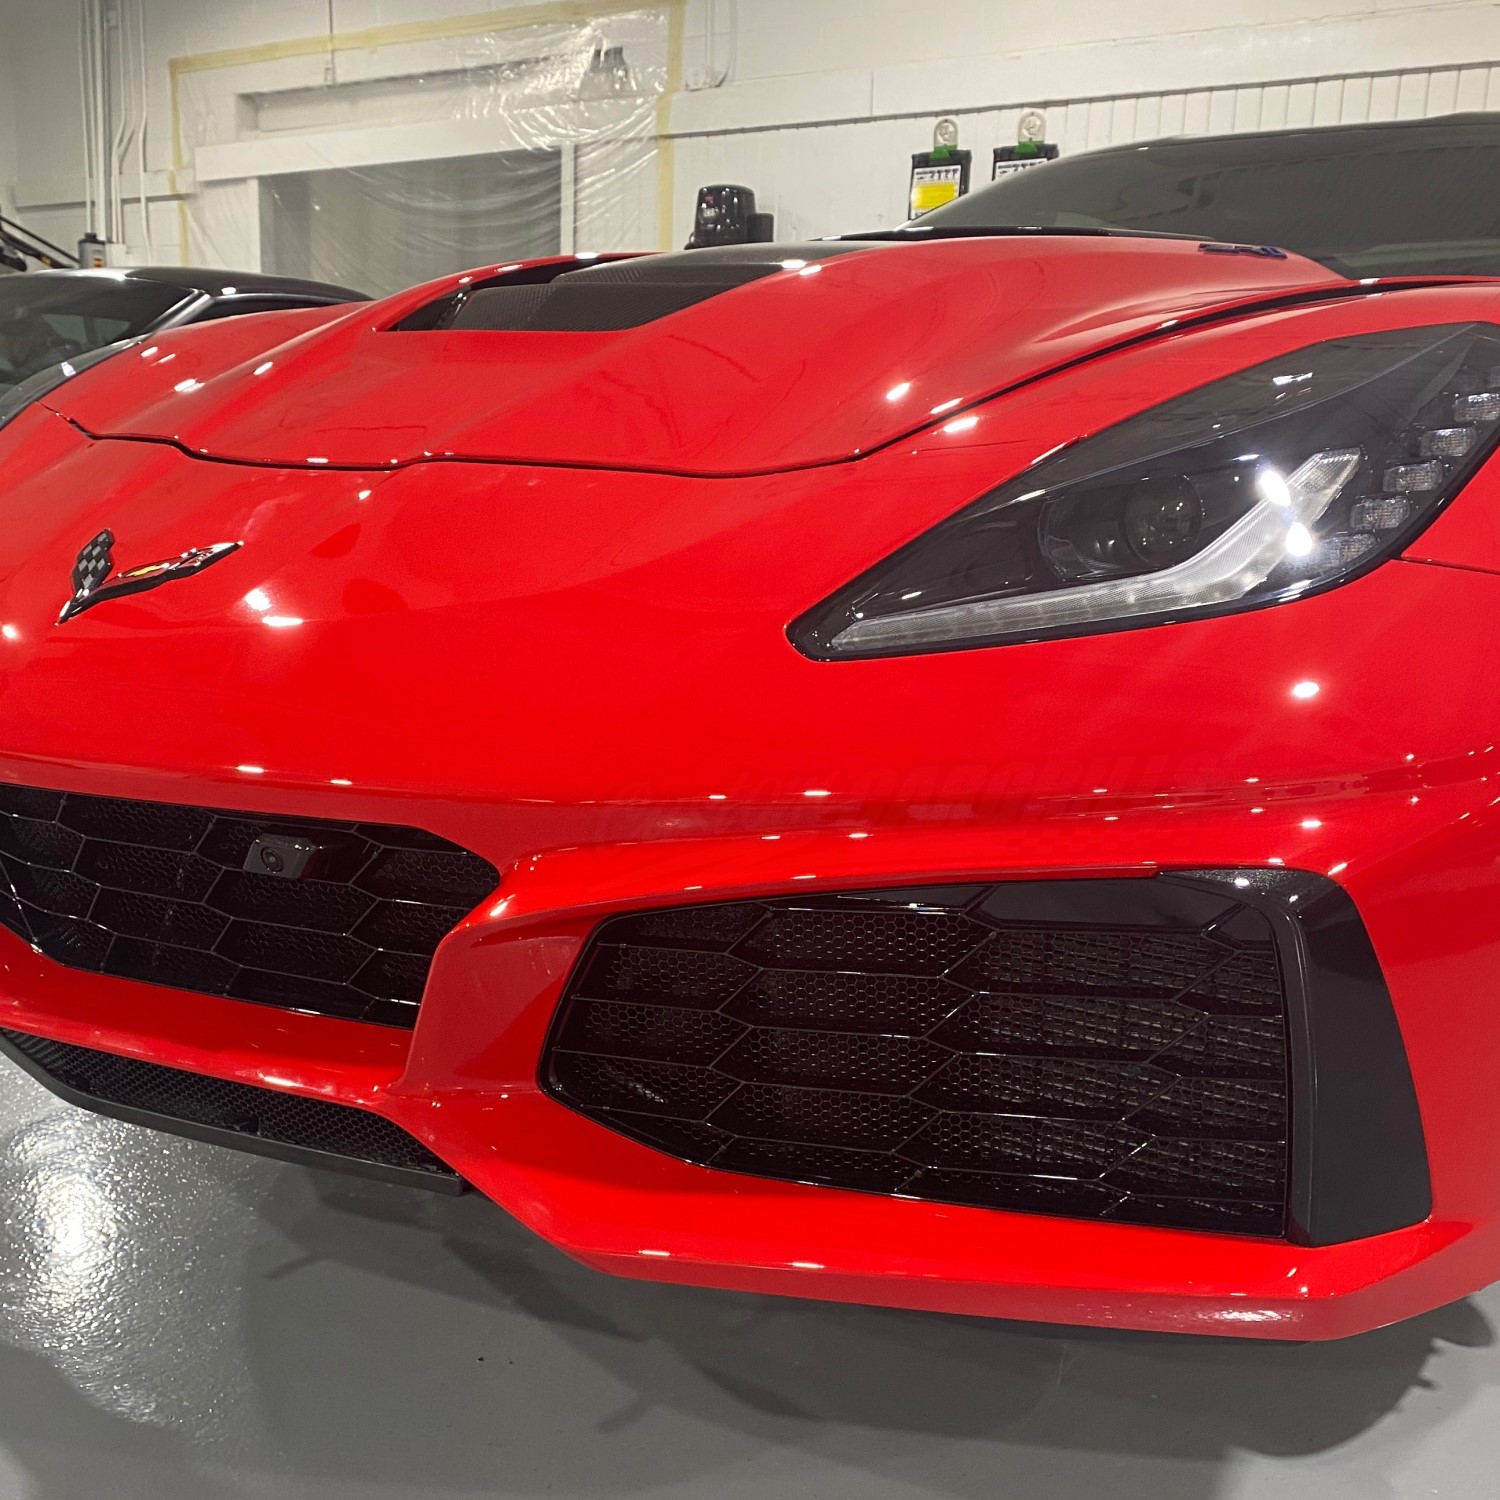 Invest in Quality: Custom Grilles for the Rare and Coveted 2019 Corvette ZR1